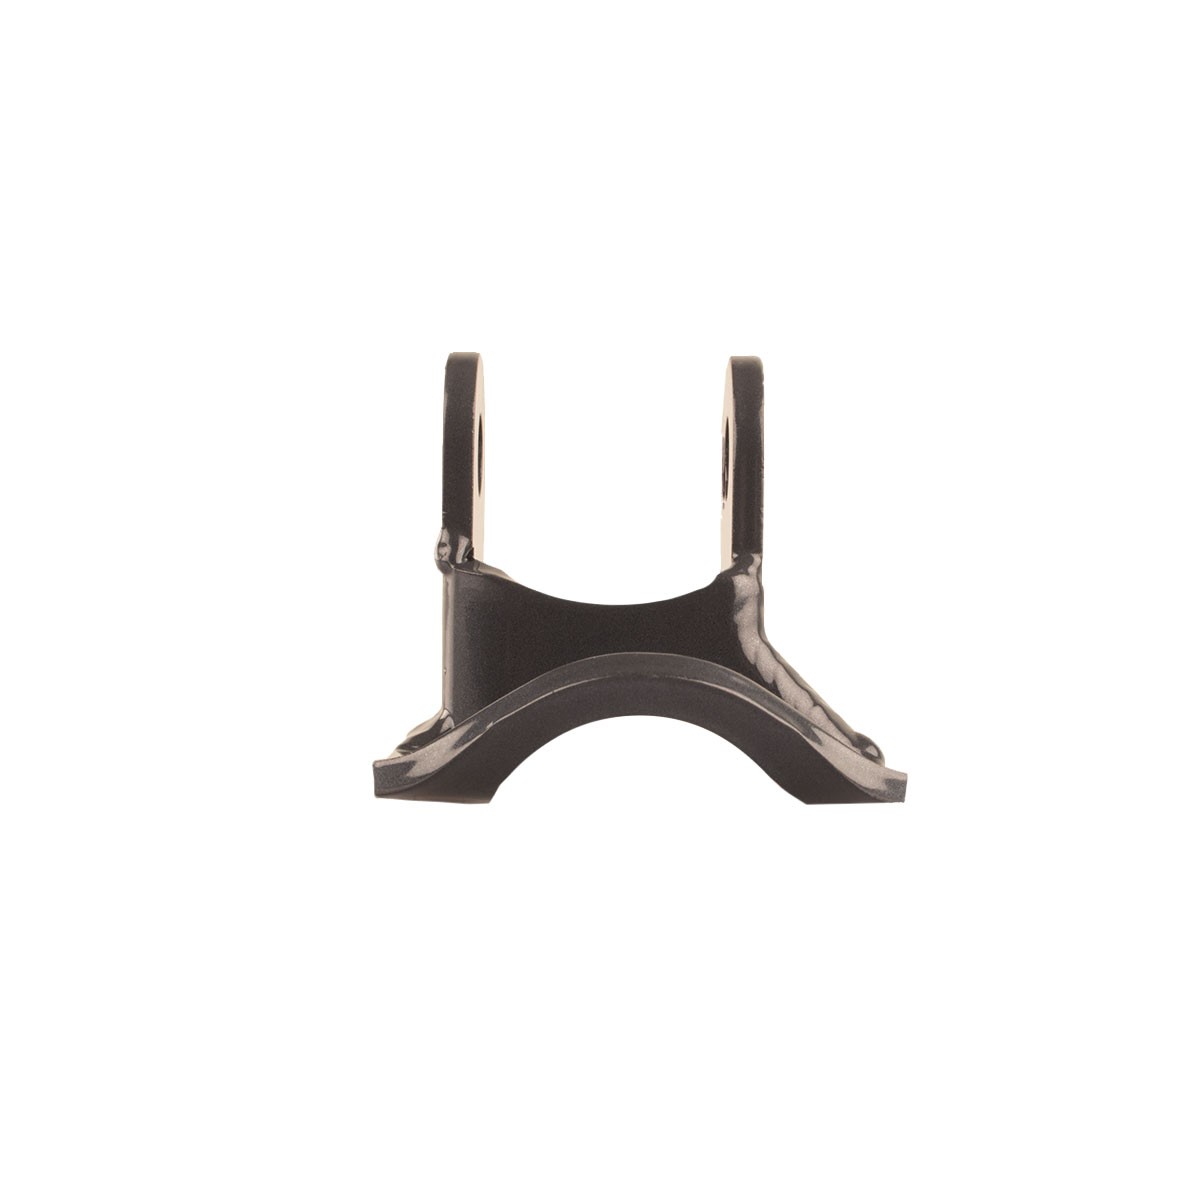 Optional Stabilizer Clamp 8703-01